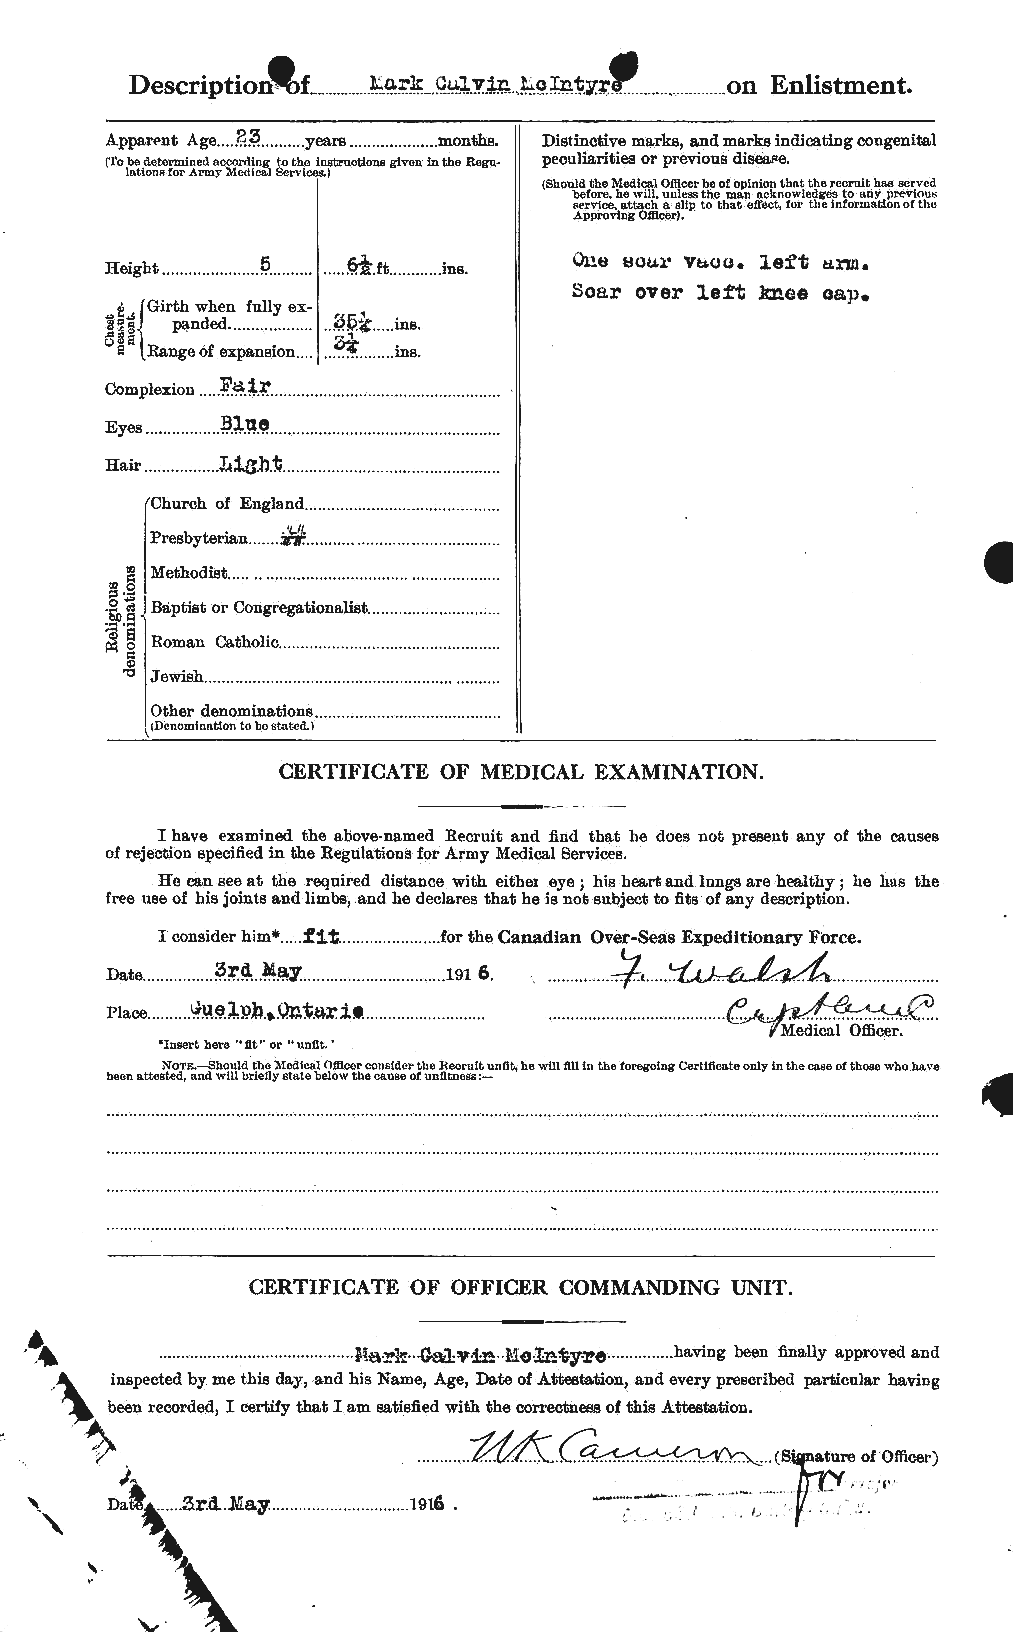 Personnel Records of the First World War - CEF 527569b